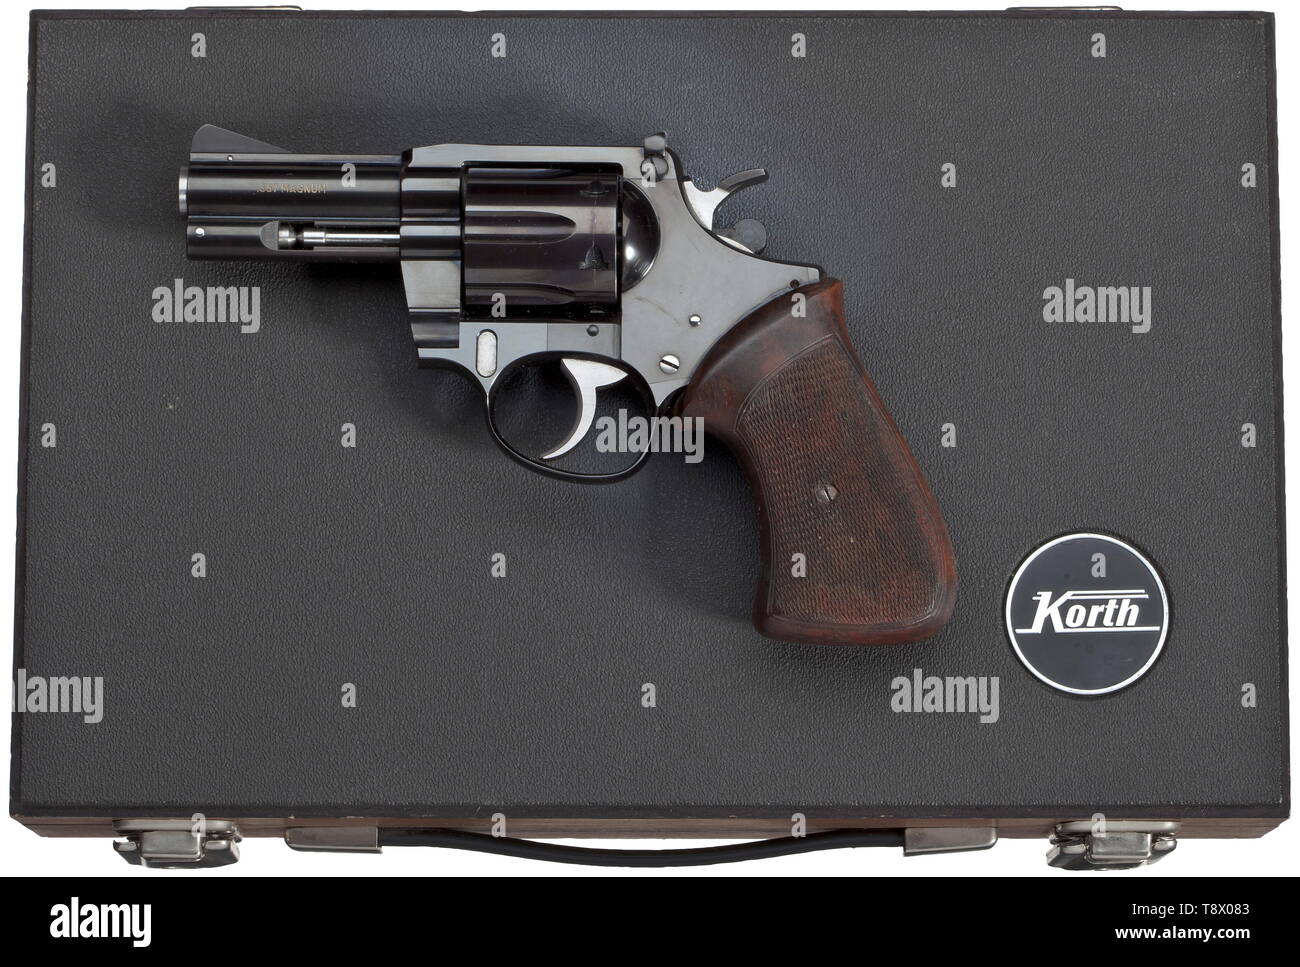 A Korth Combat revolver, series 27, in its case Cal..357 Mag, no. 27020. Matching numbers. Bright bore. Barrel without ventilated sighting rib, length 77 mm (3 inch). Six shots. Proof-marked 1973. Adjustable sights. Broad hammer, ribbed trigger. Three-line company name. Complete original highly polished finish. Operational parts polished white on the sides. Dark walnut grip panels without thumb-rest. Total manufacture: 15 weapons as a forerunner of the 28 series, which presented combat revolvers for the first time. Collector's item in new conditi, Additional-Rights-Clearance-Info-Not-Available Stock Photo